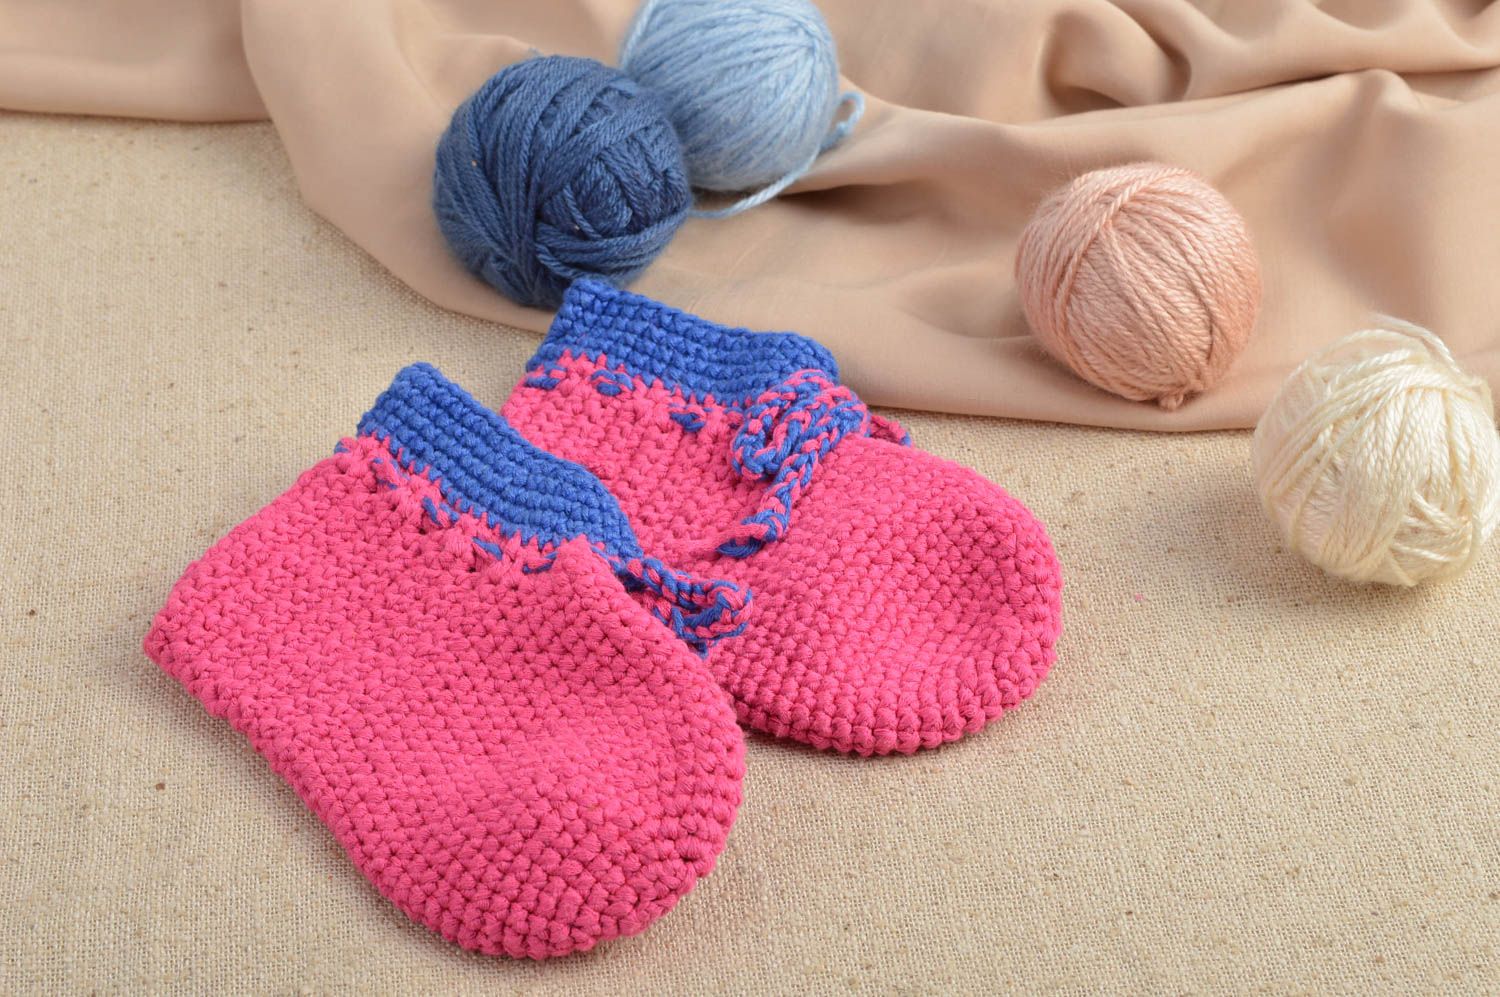 Handmade crochet baby booties goods for children baby shoes best gifts for kids photo 1